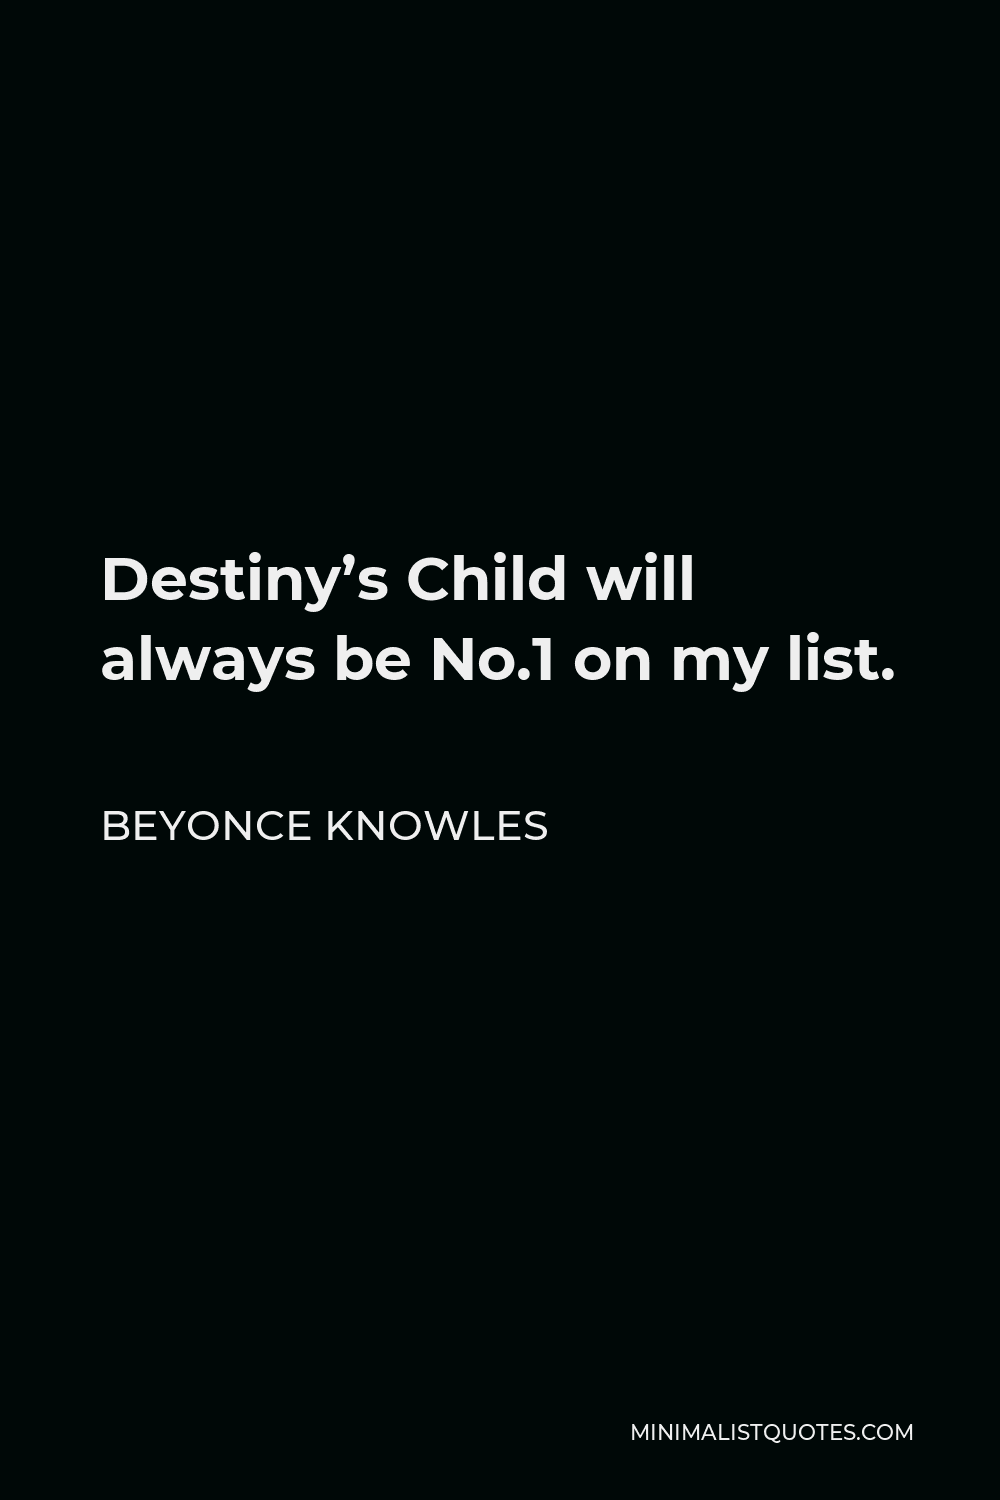 Beyonce Knowles Quote - Destiny’s Child will always be No.1 on my list.